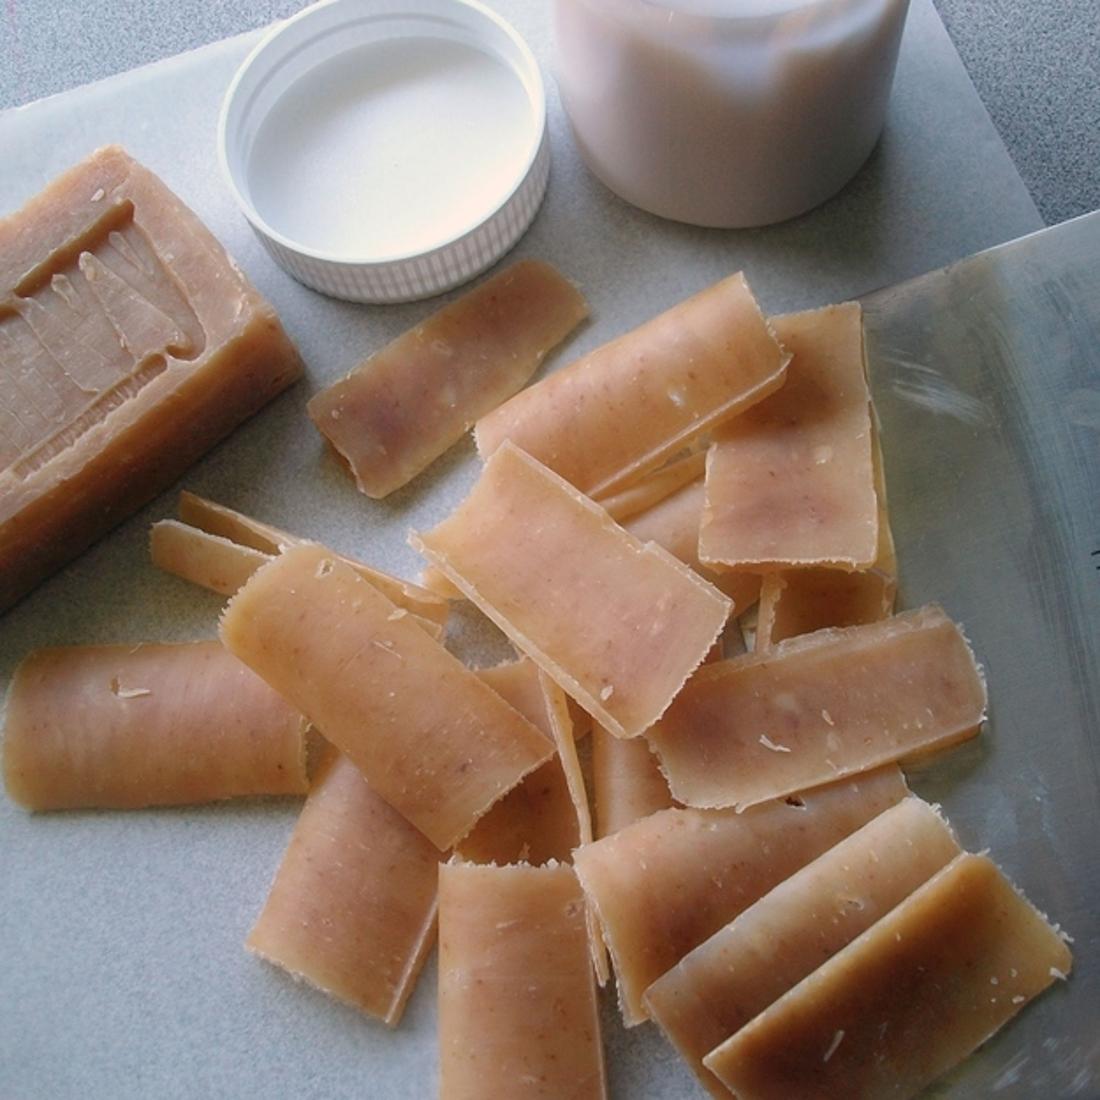 Make single-use soap leaves from a bar of soap and a vegetable peeler.